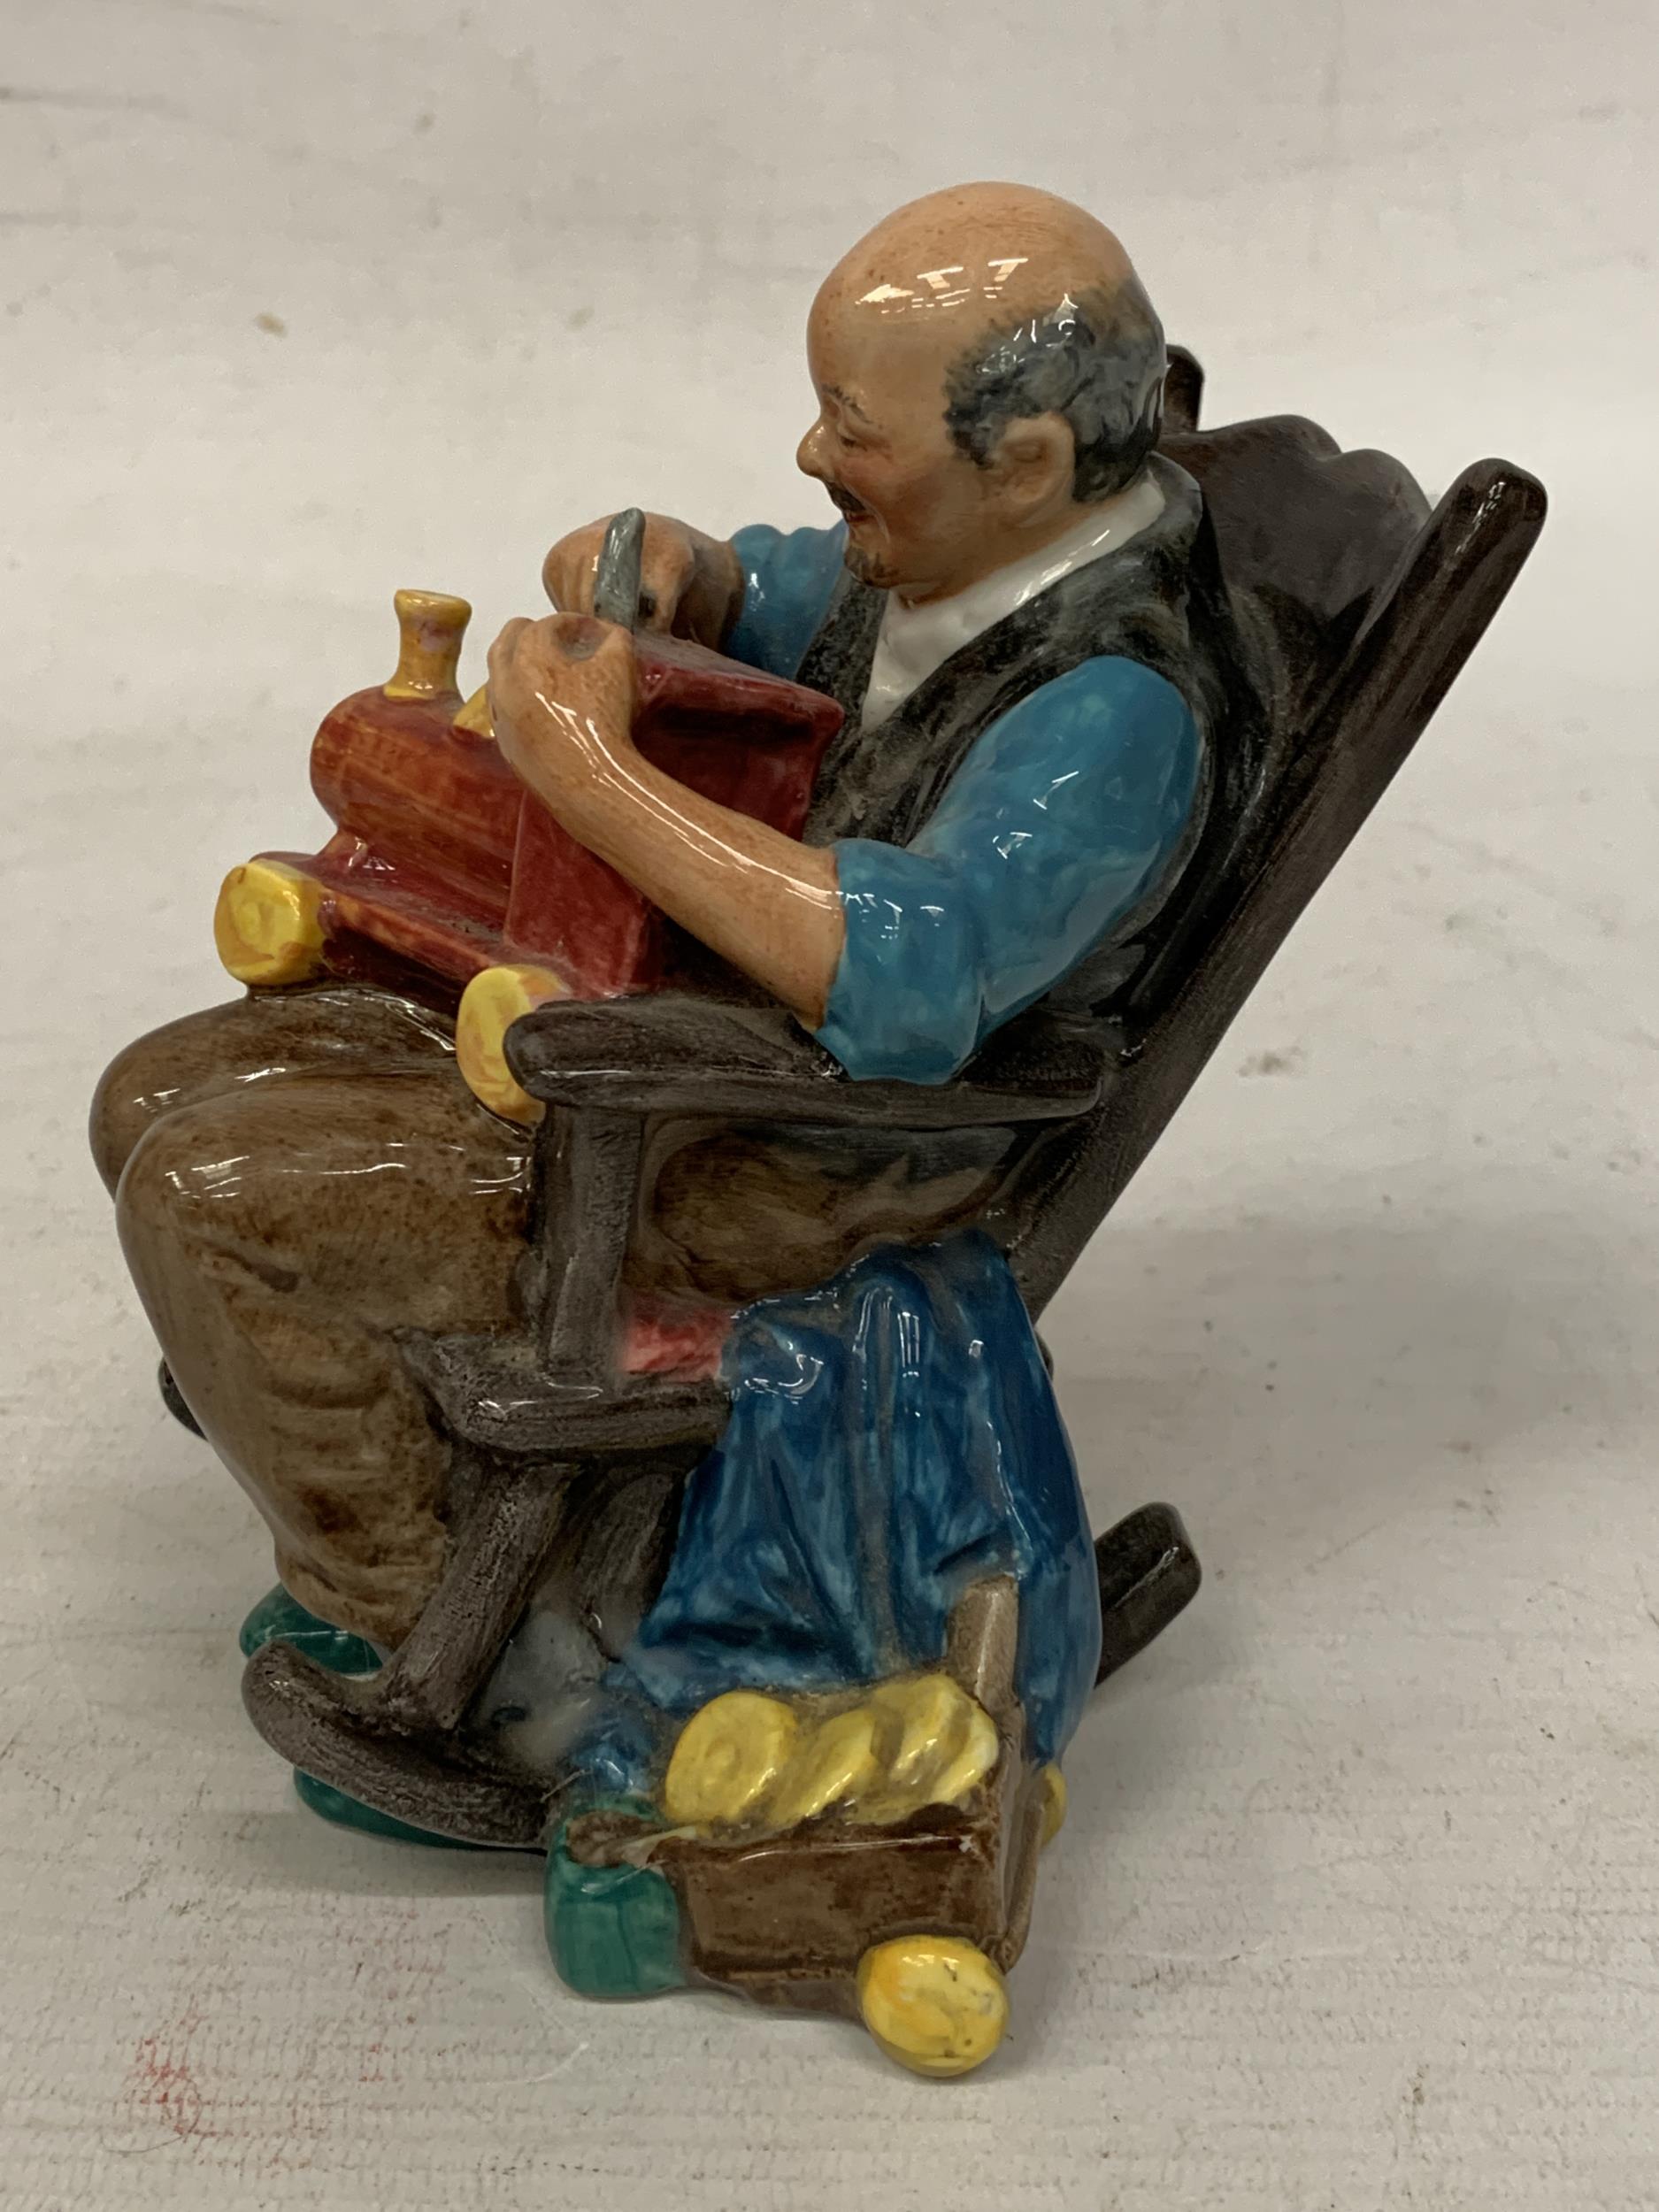 A ROYAL DOULTON FIGURE "THE TOYMAKER" HN 2250 - Image 4 of 5